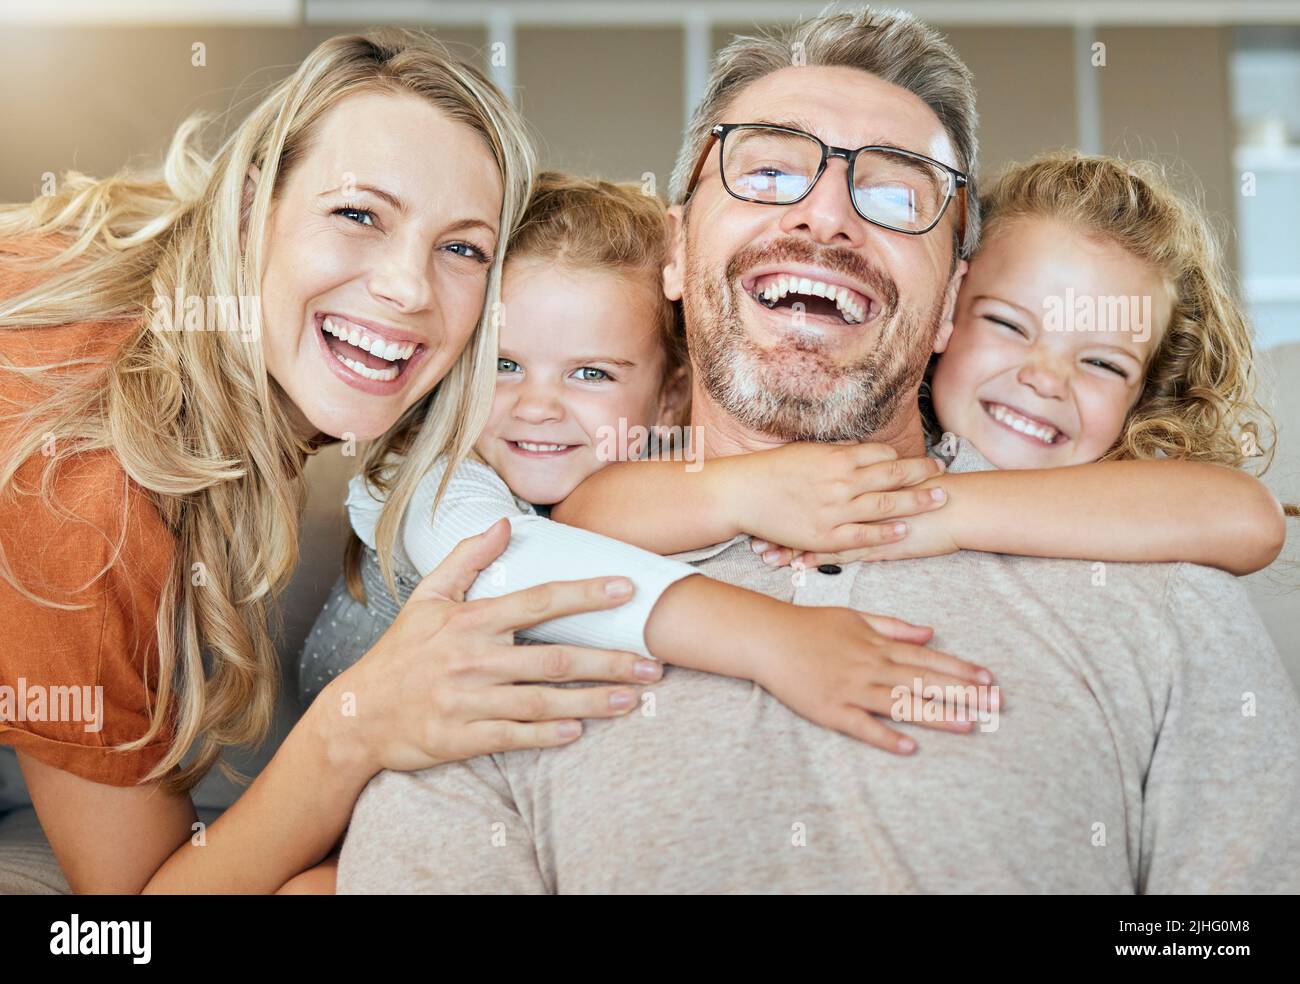 Portrait of a happy Caucasian family of four relaxing in the living room at home. Loving smiling family being affectionate together. Young couple Stock Photo